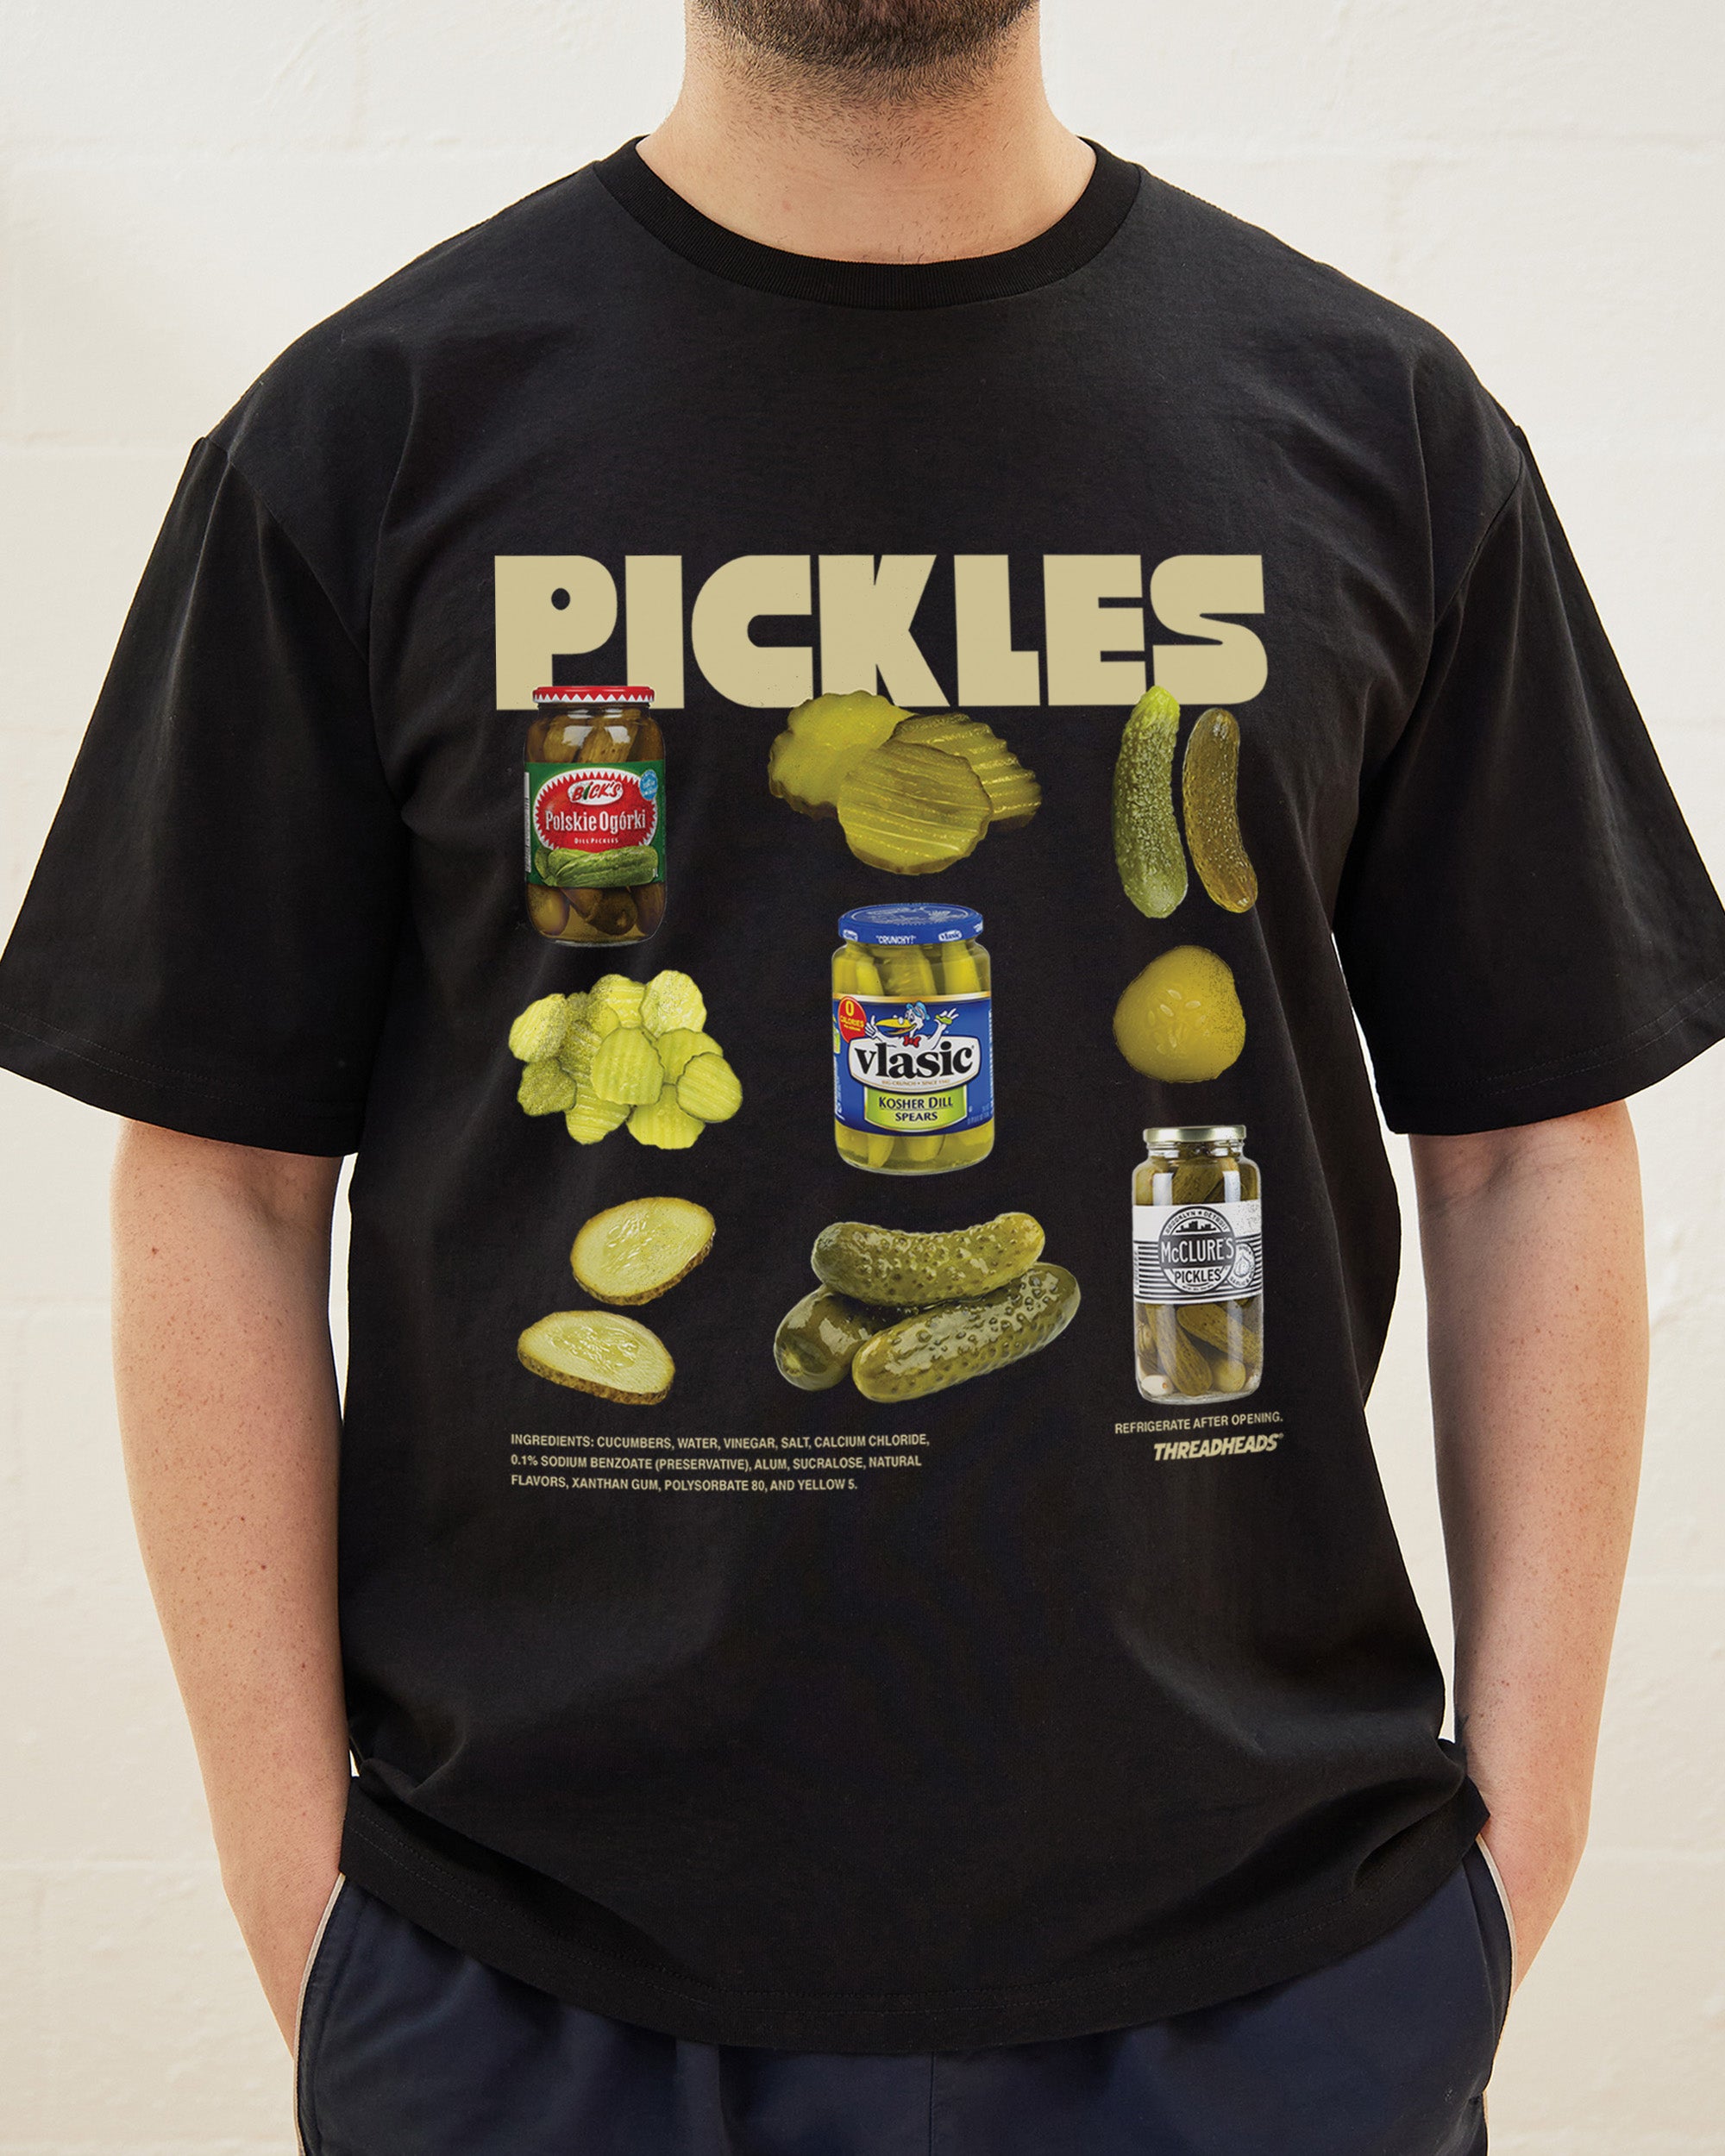 The Pickles T-Shirt Europe Online Black